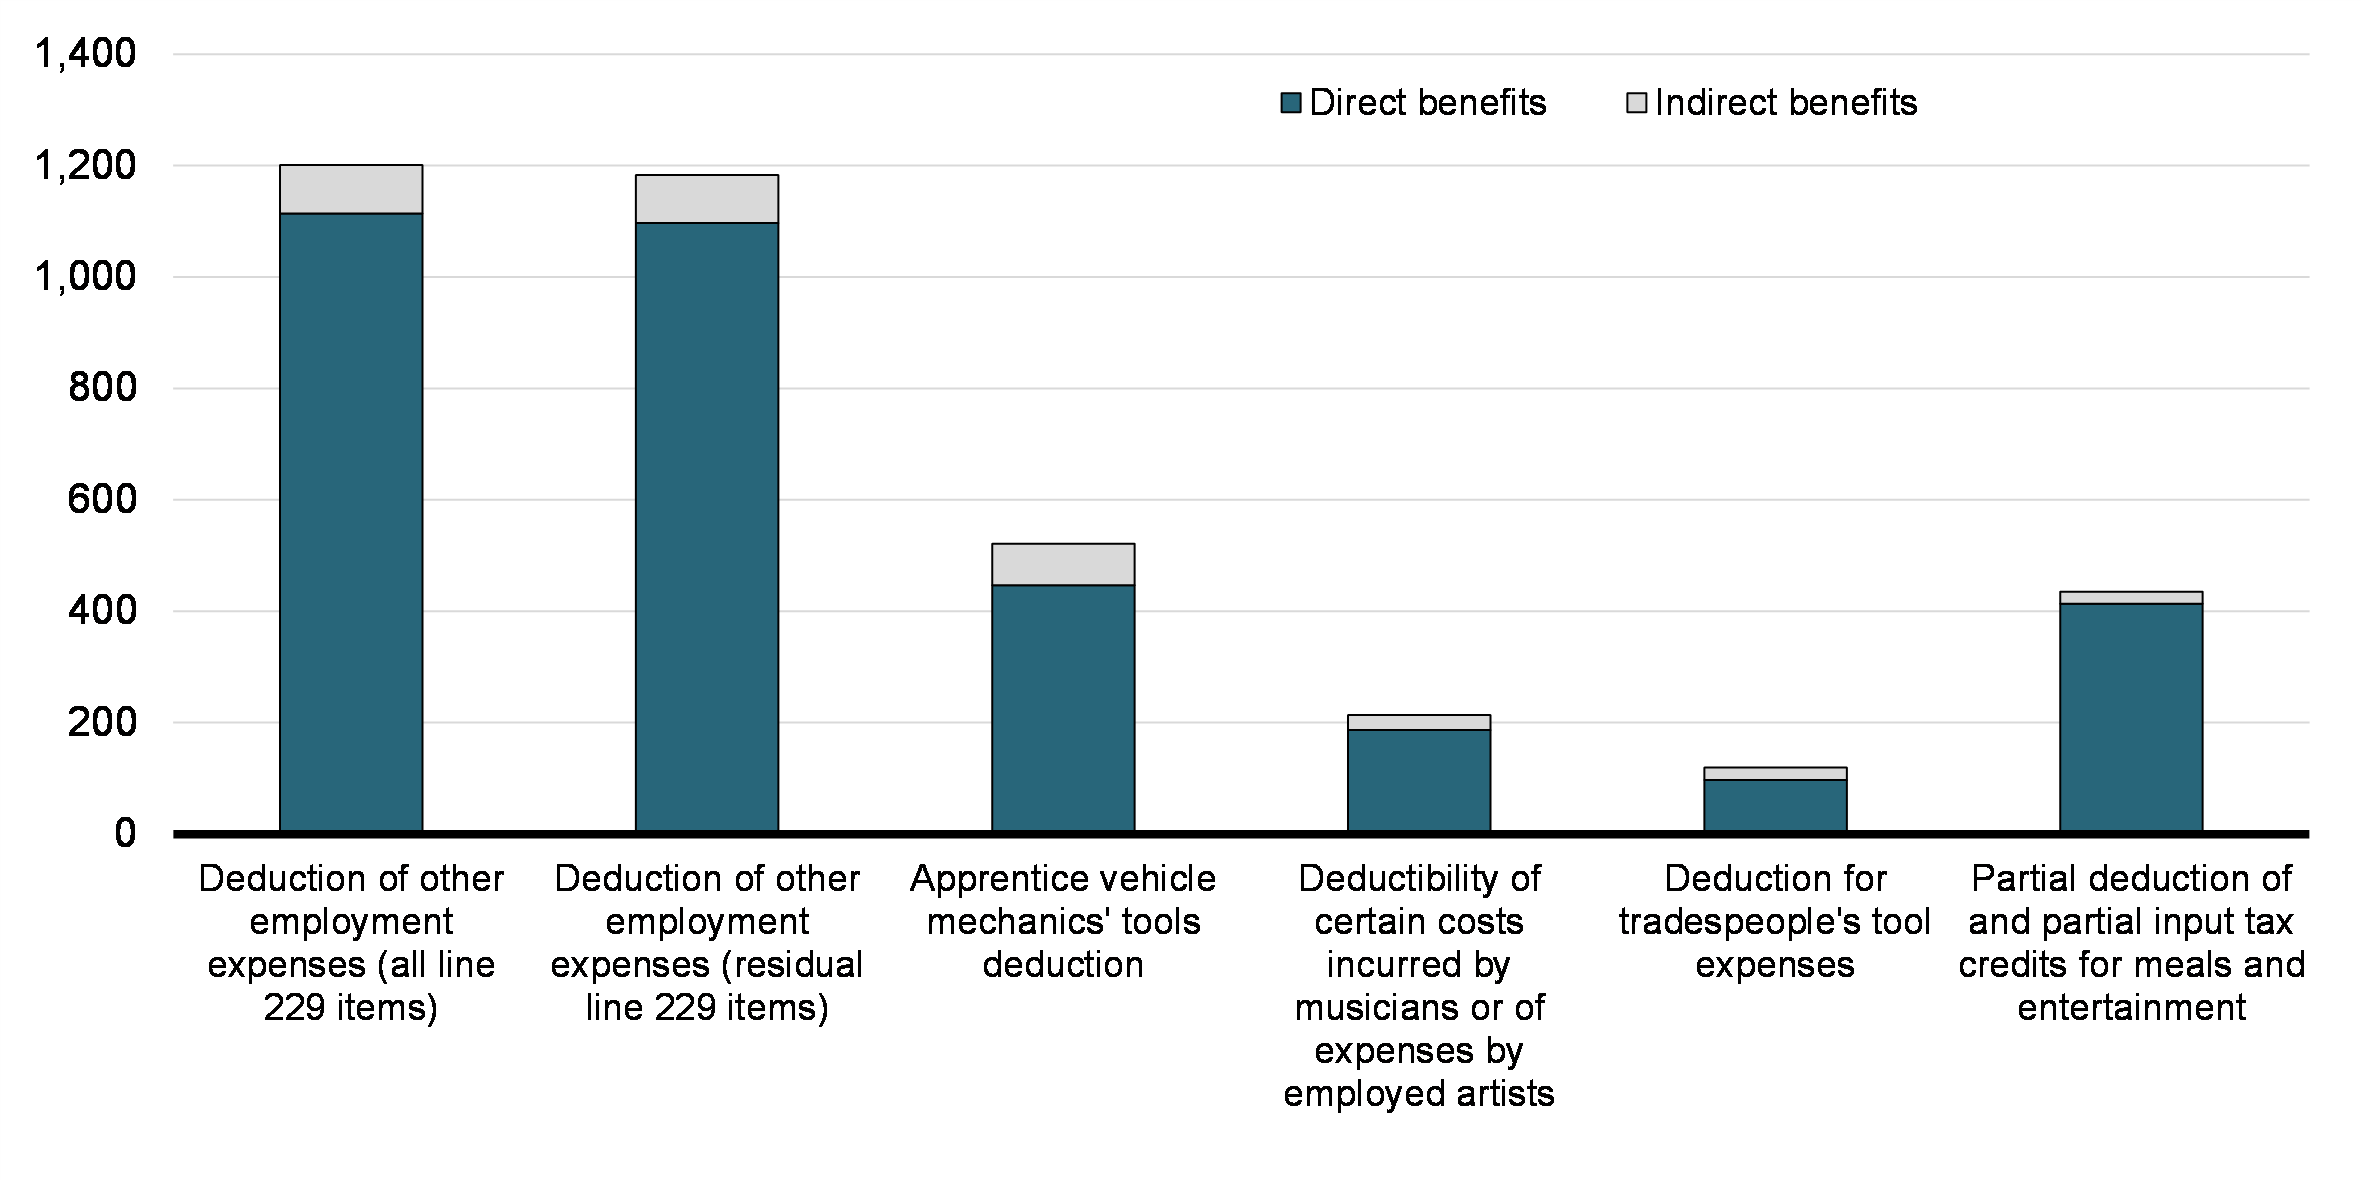  Chart 36: Direct and Indirect Benefits of OEE Deductions, Overall and by Component (2018), in 2019 Dollars
